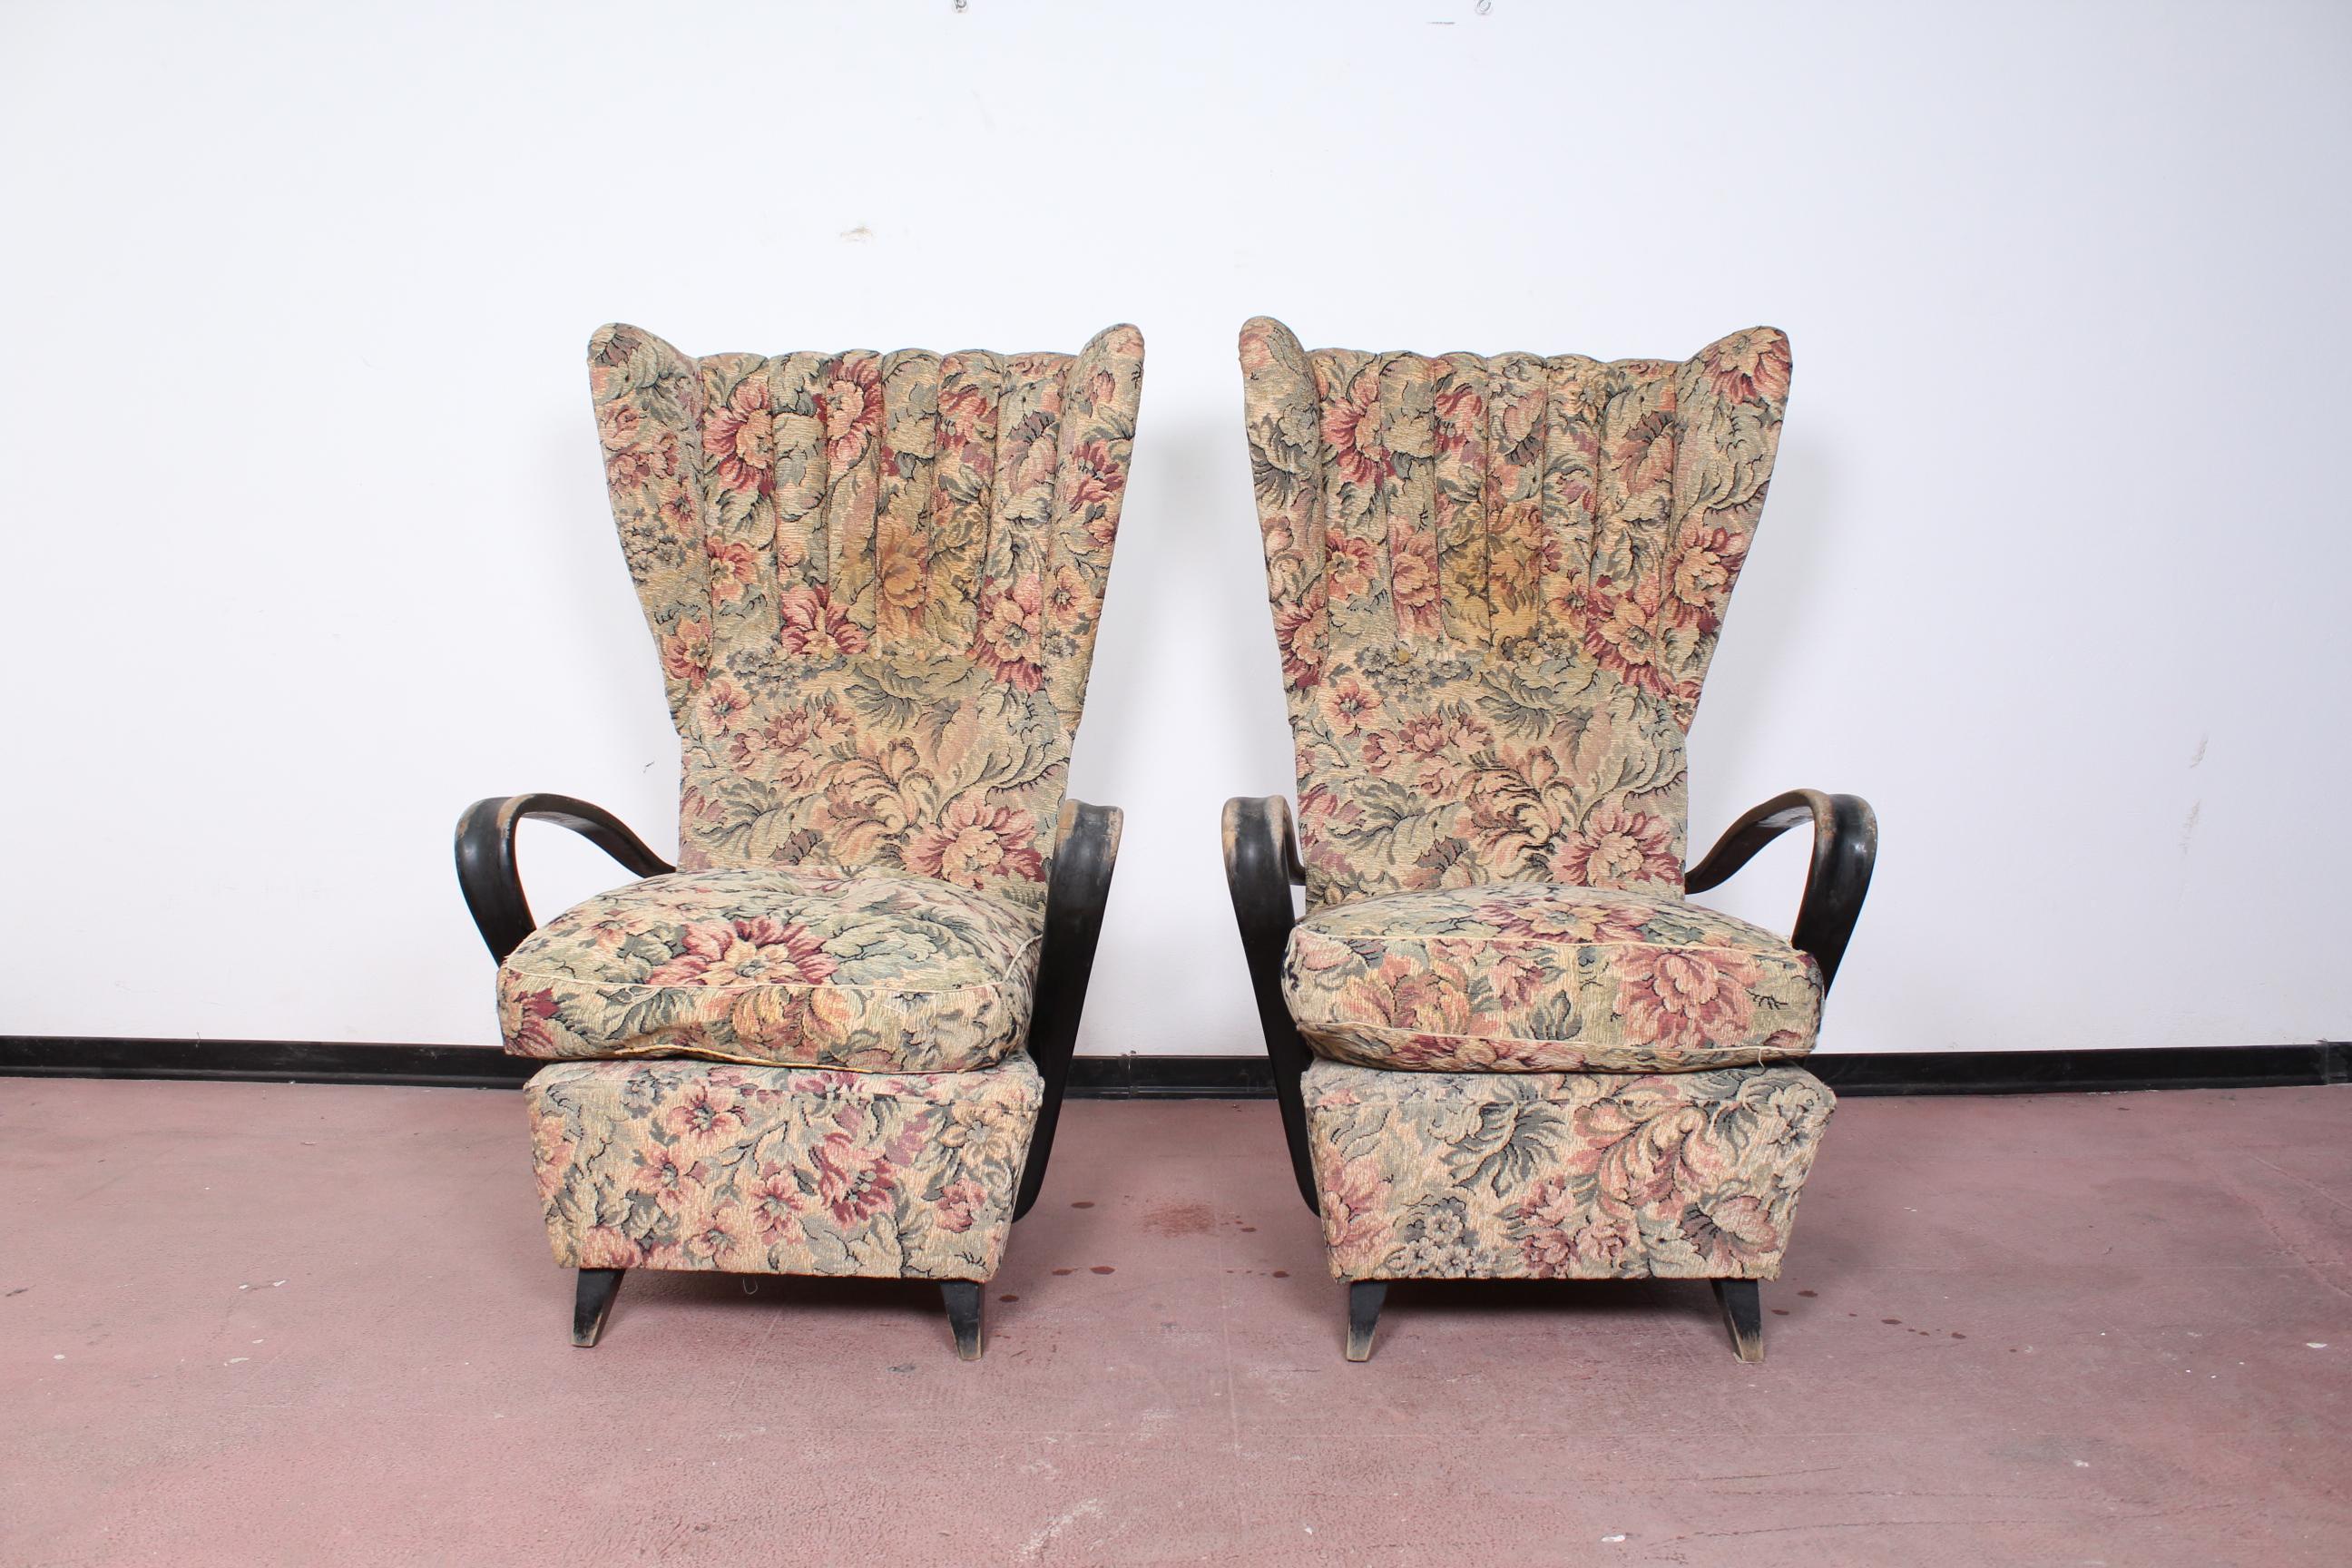 Pair of Paolo Buffa armchairs, Italy, circa 1950. Stylish wingback armchairs with carved wooden arms, in floral original fabric.
 Wear consistent with age and use.